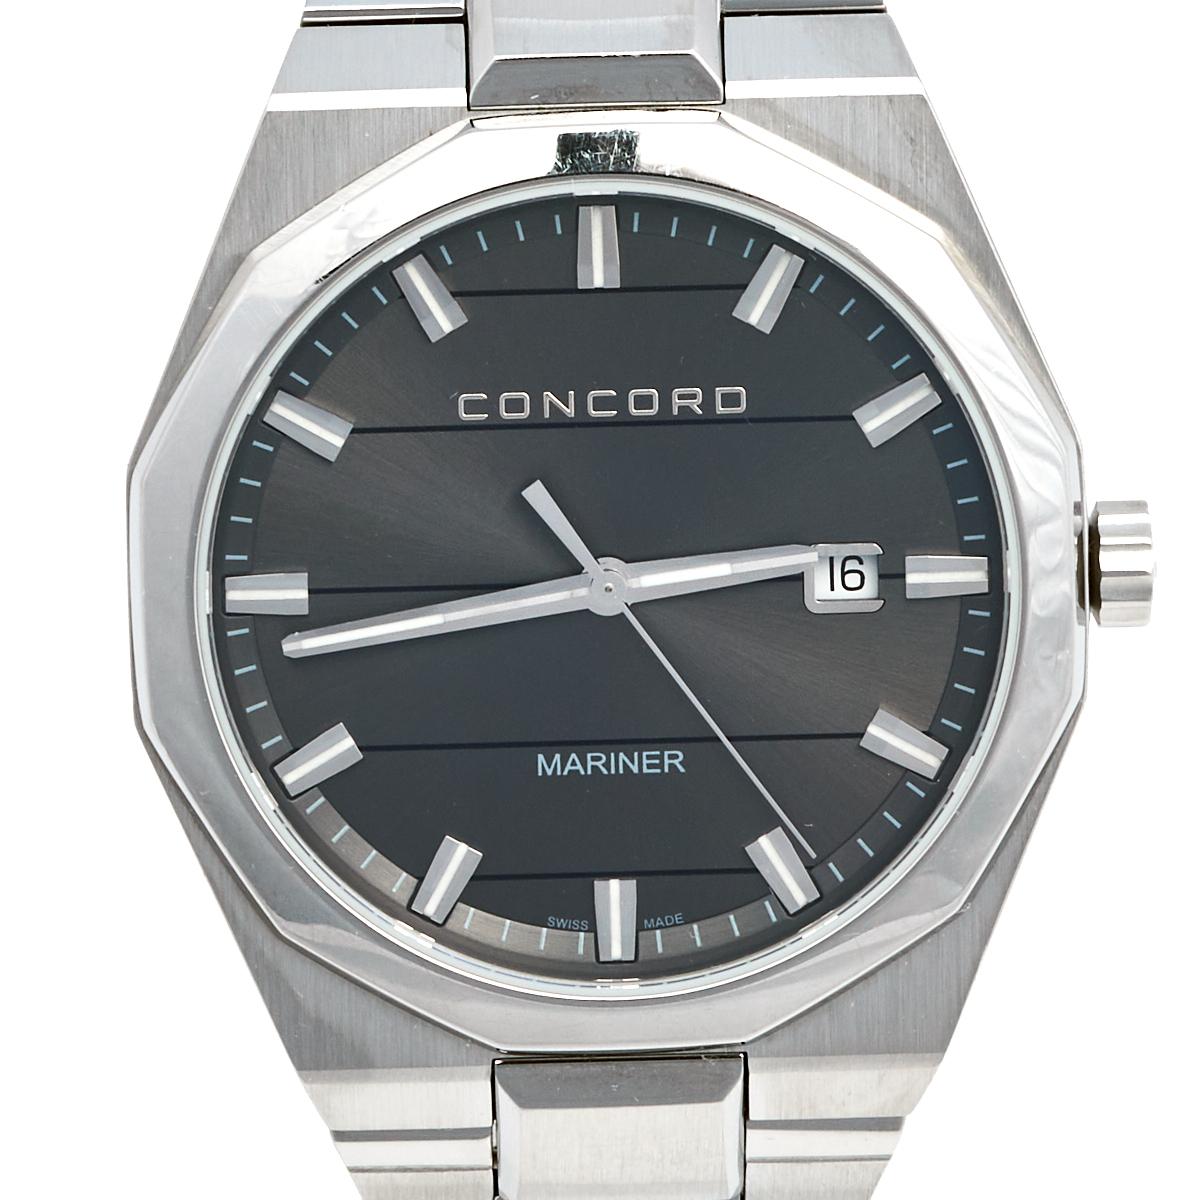 A fine accessory to pair with both your daytime casuals as well as smarter looks, this Concord Mariner 05.1.14.1093 wristwatch is a must-have for all with classic taste. An exemplar of the label's fine artistry, this stainless steel watch features a